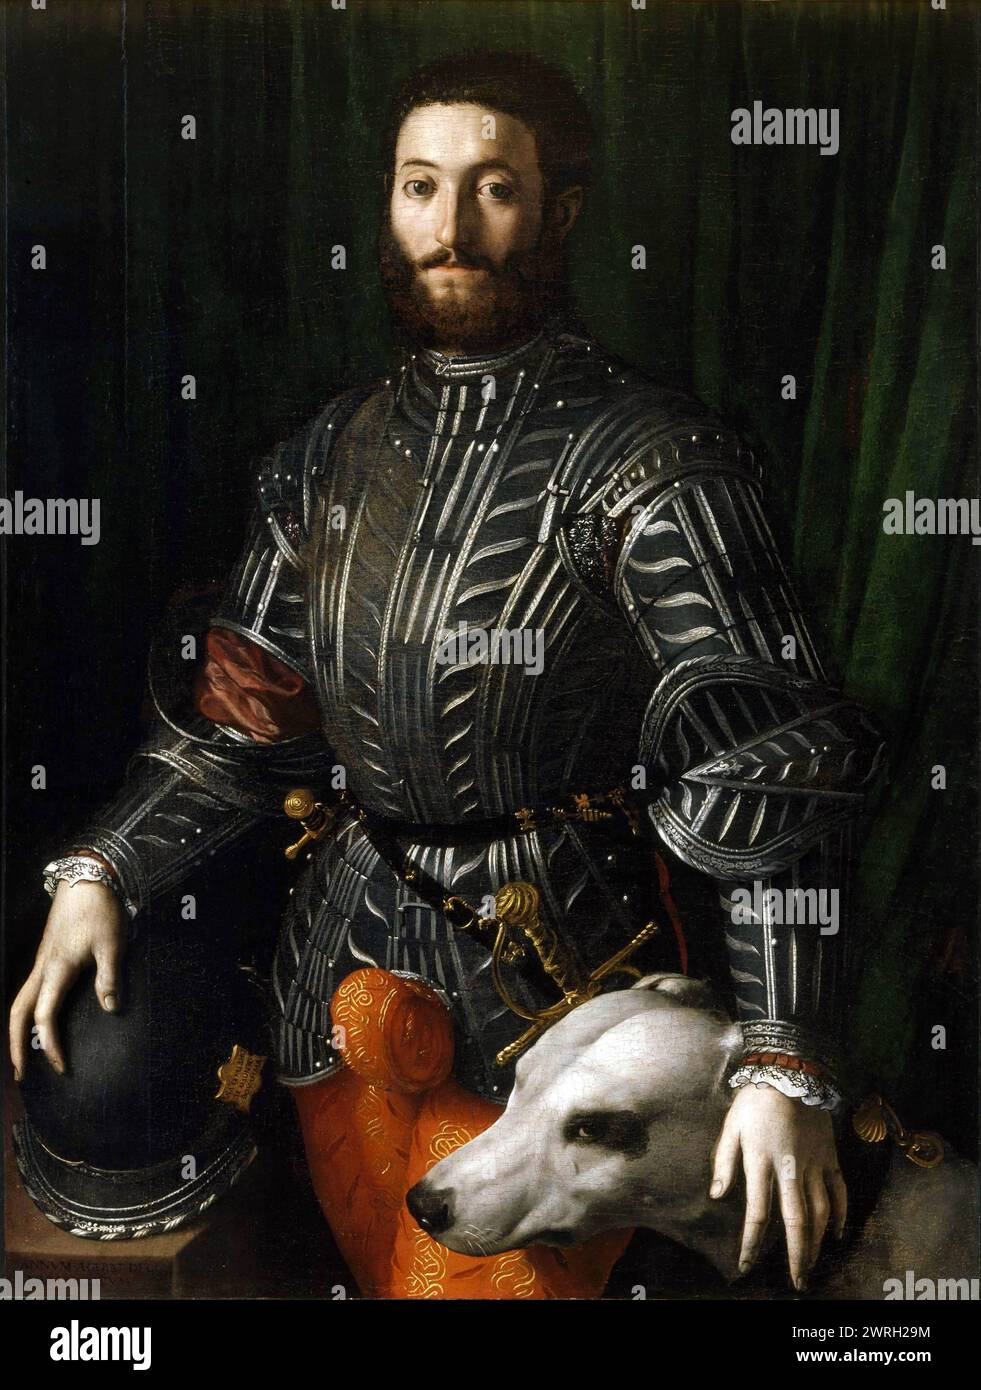 Portrait of Guidobaldo II della Rovere (1514-1574), 1531. Found in the Collection of the Galleria Palatina, Florence. Stock Photo